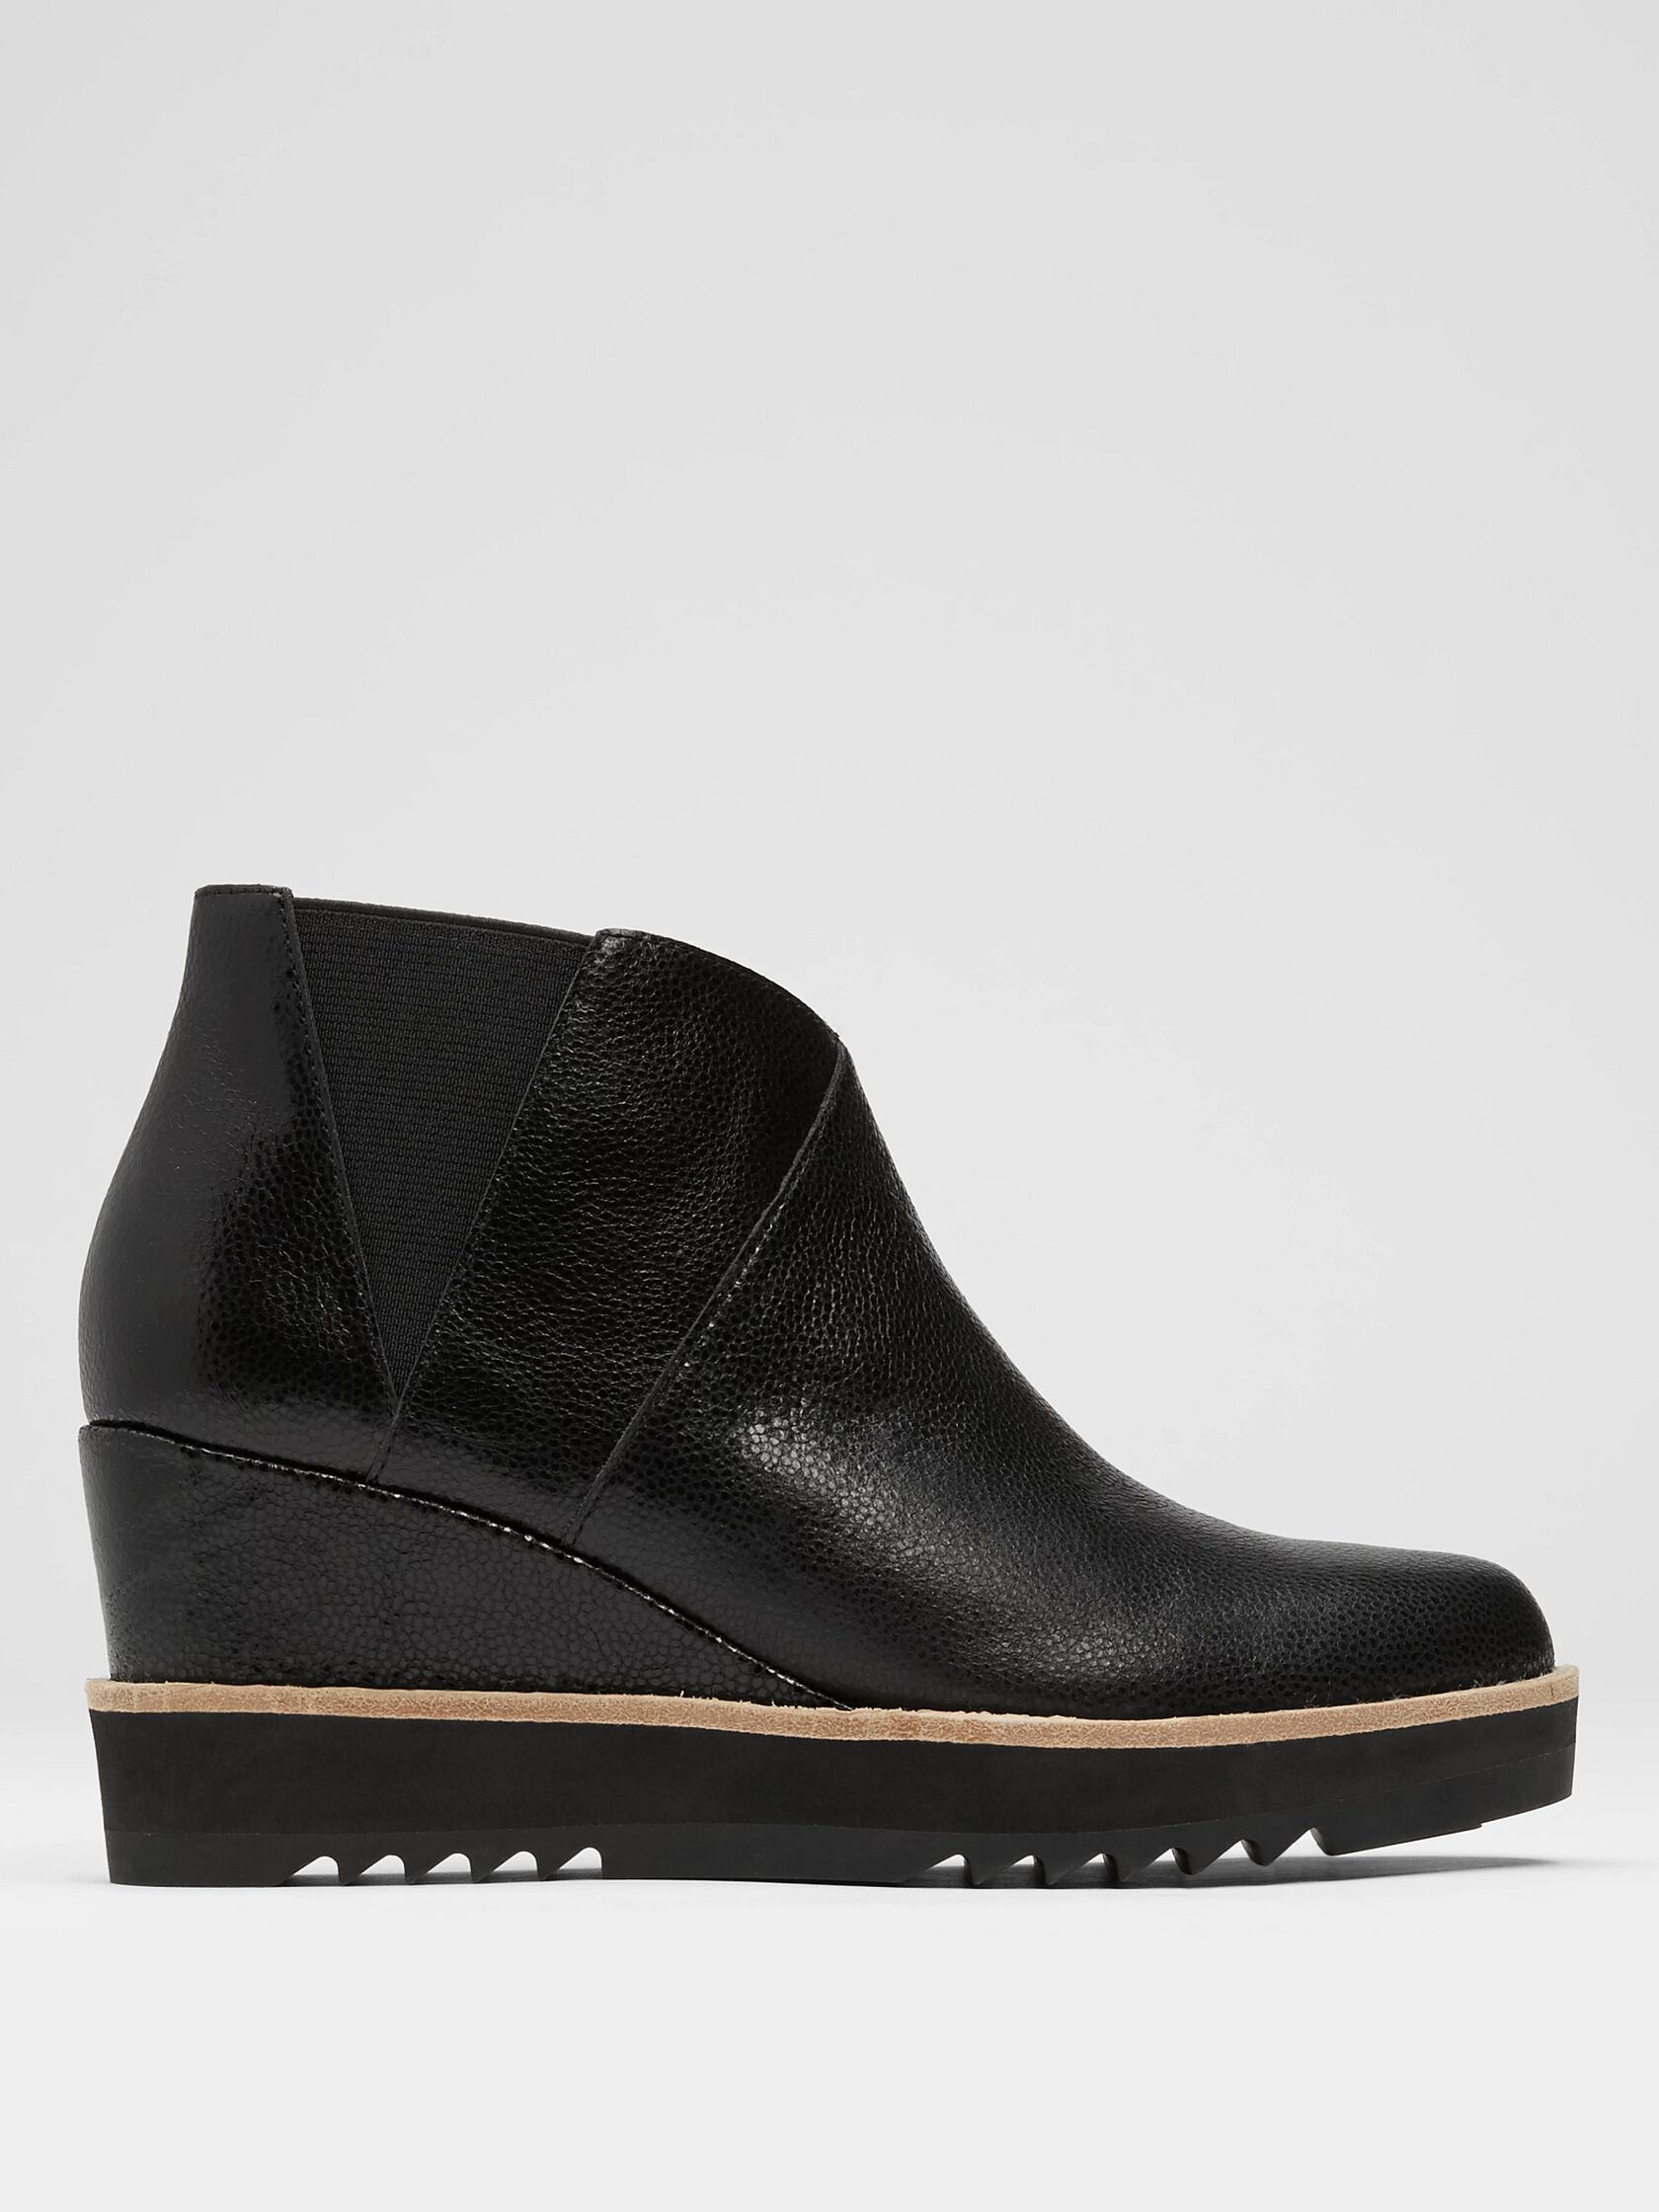 Caddy Wedge Bootie in Embossed Leather